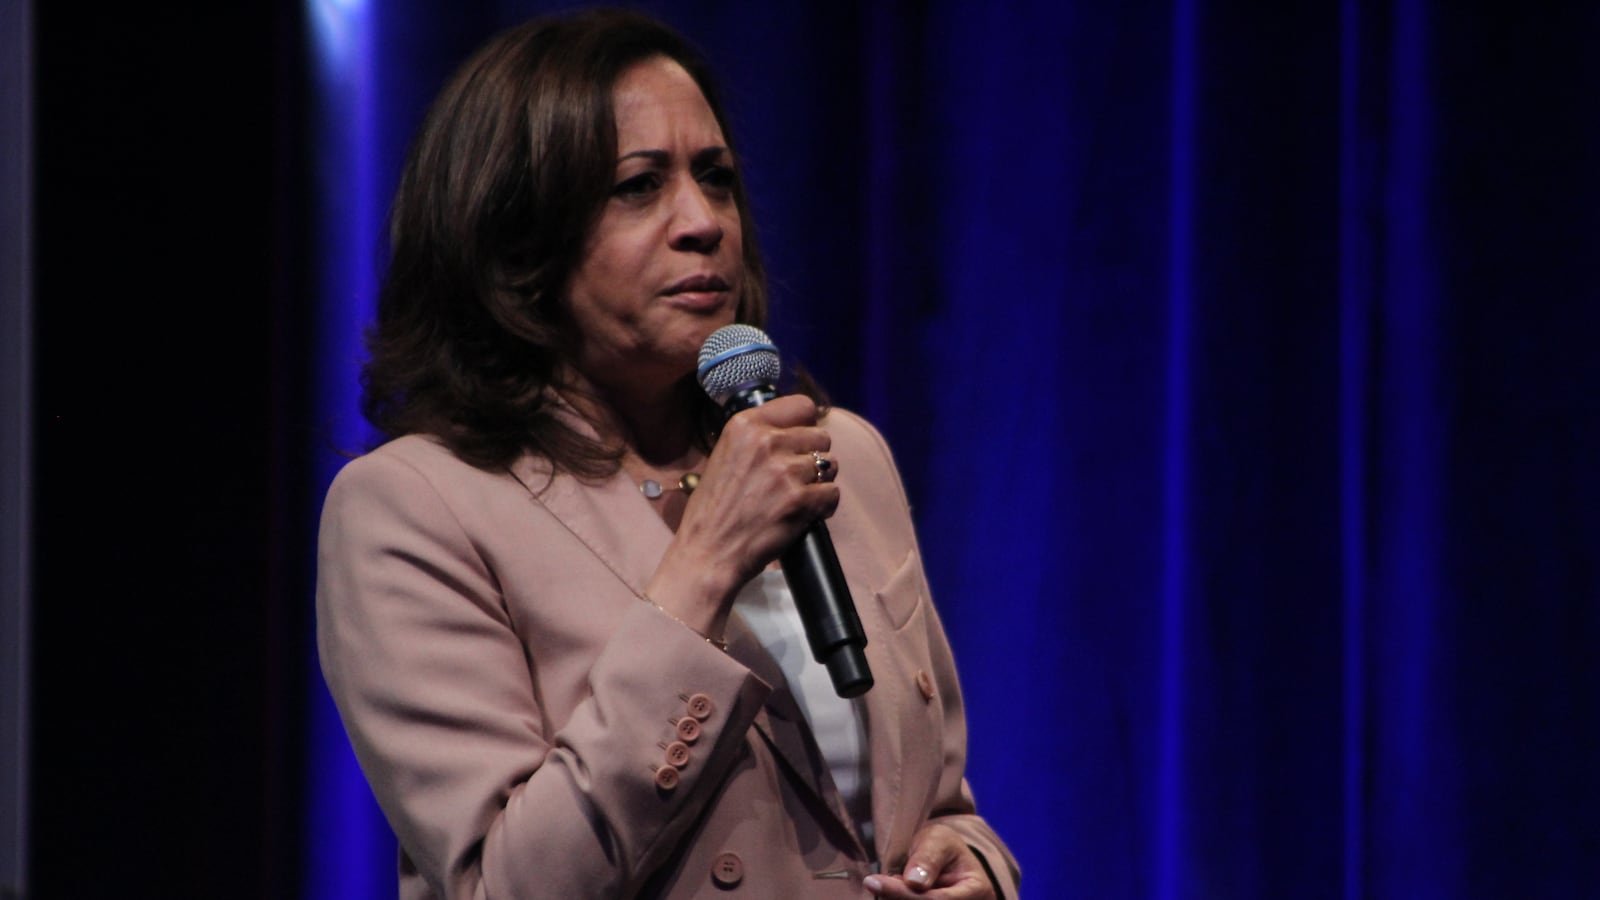 U.S. Sen. Kamala Harris speaks at a forum for Democratic presidential candidates Friday as part of the National Urban League's annual conference.